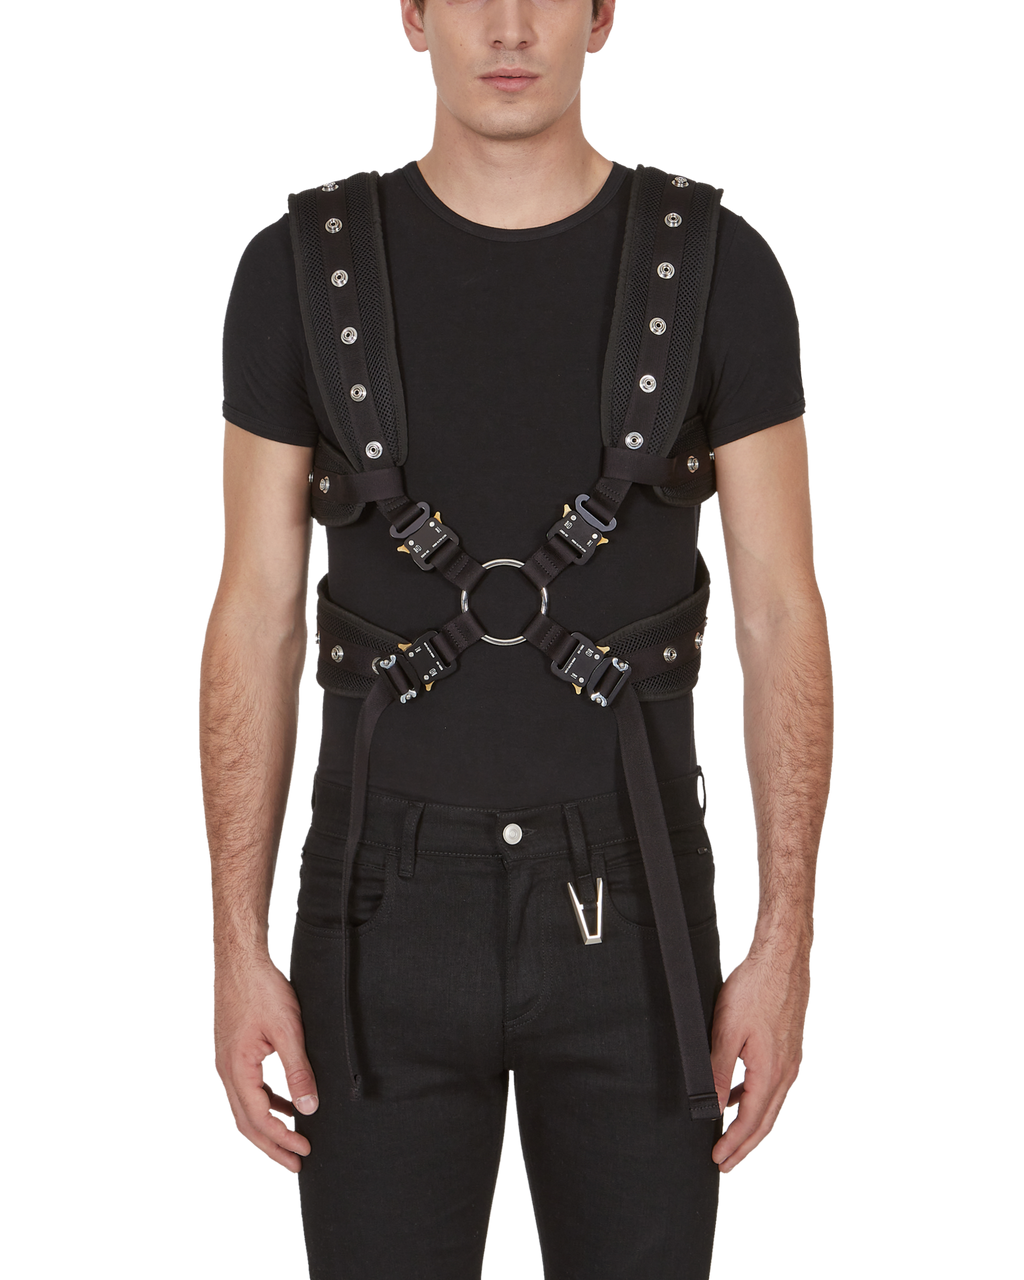 RING BUCKLE HARNESS